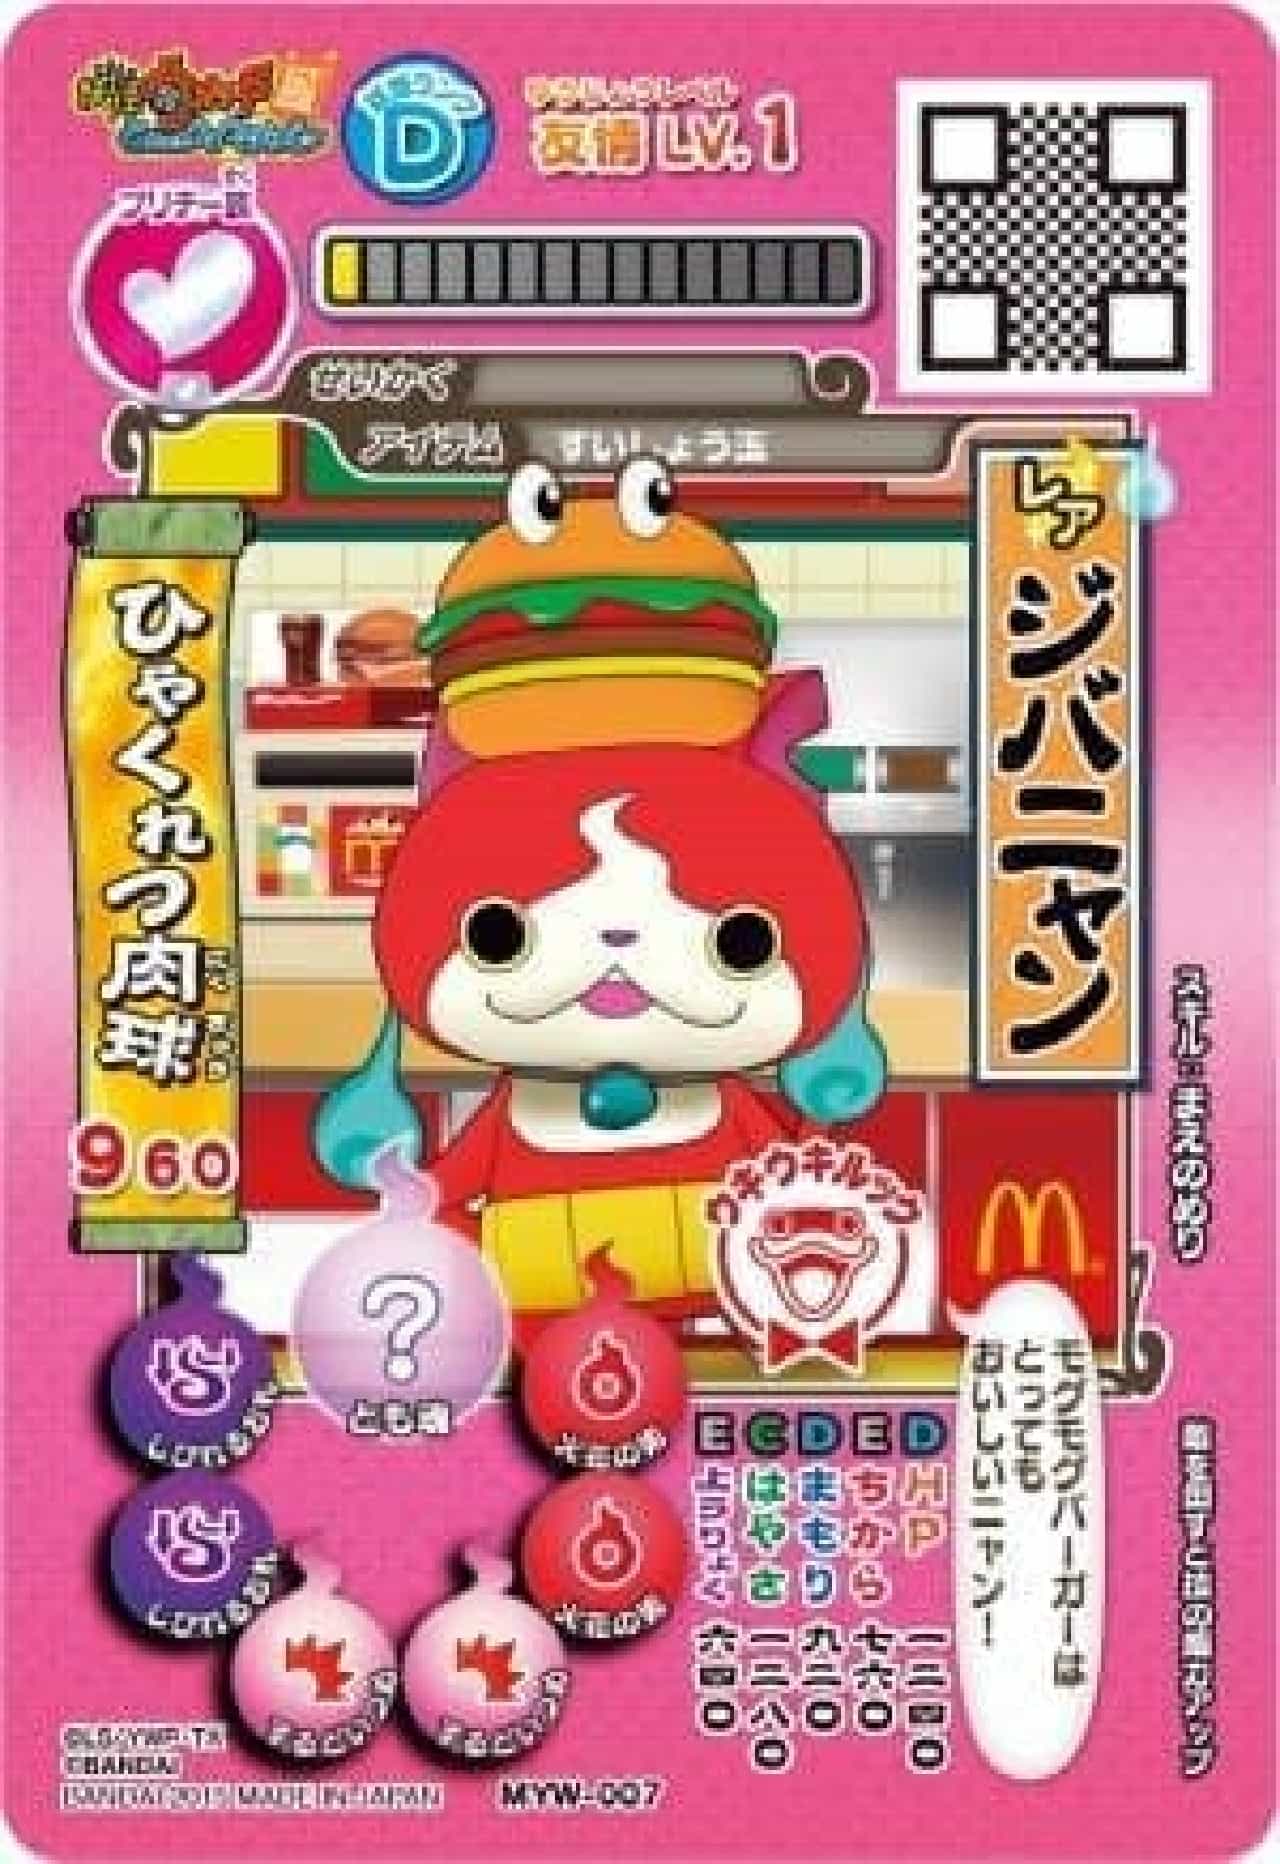 Limited design Jibanyan is also available!